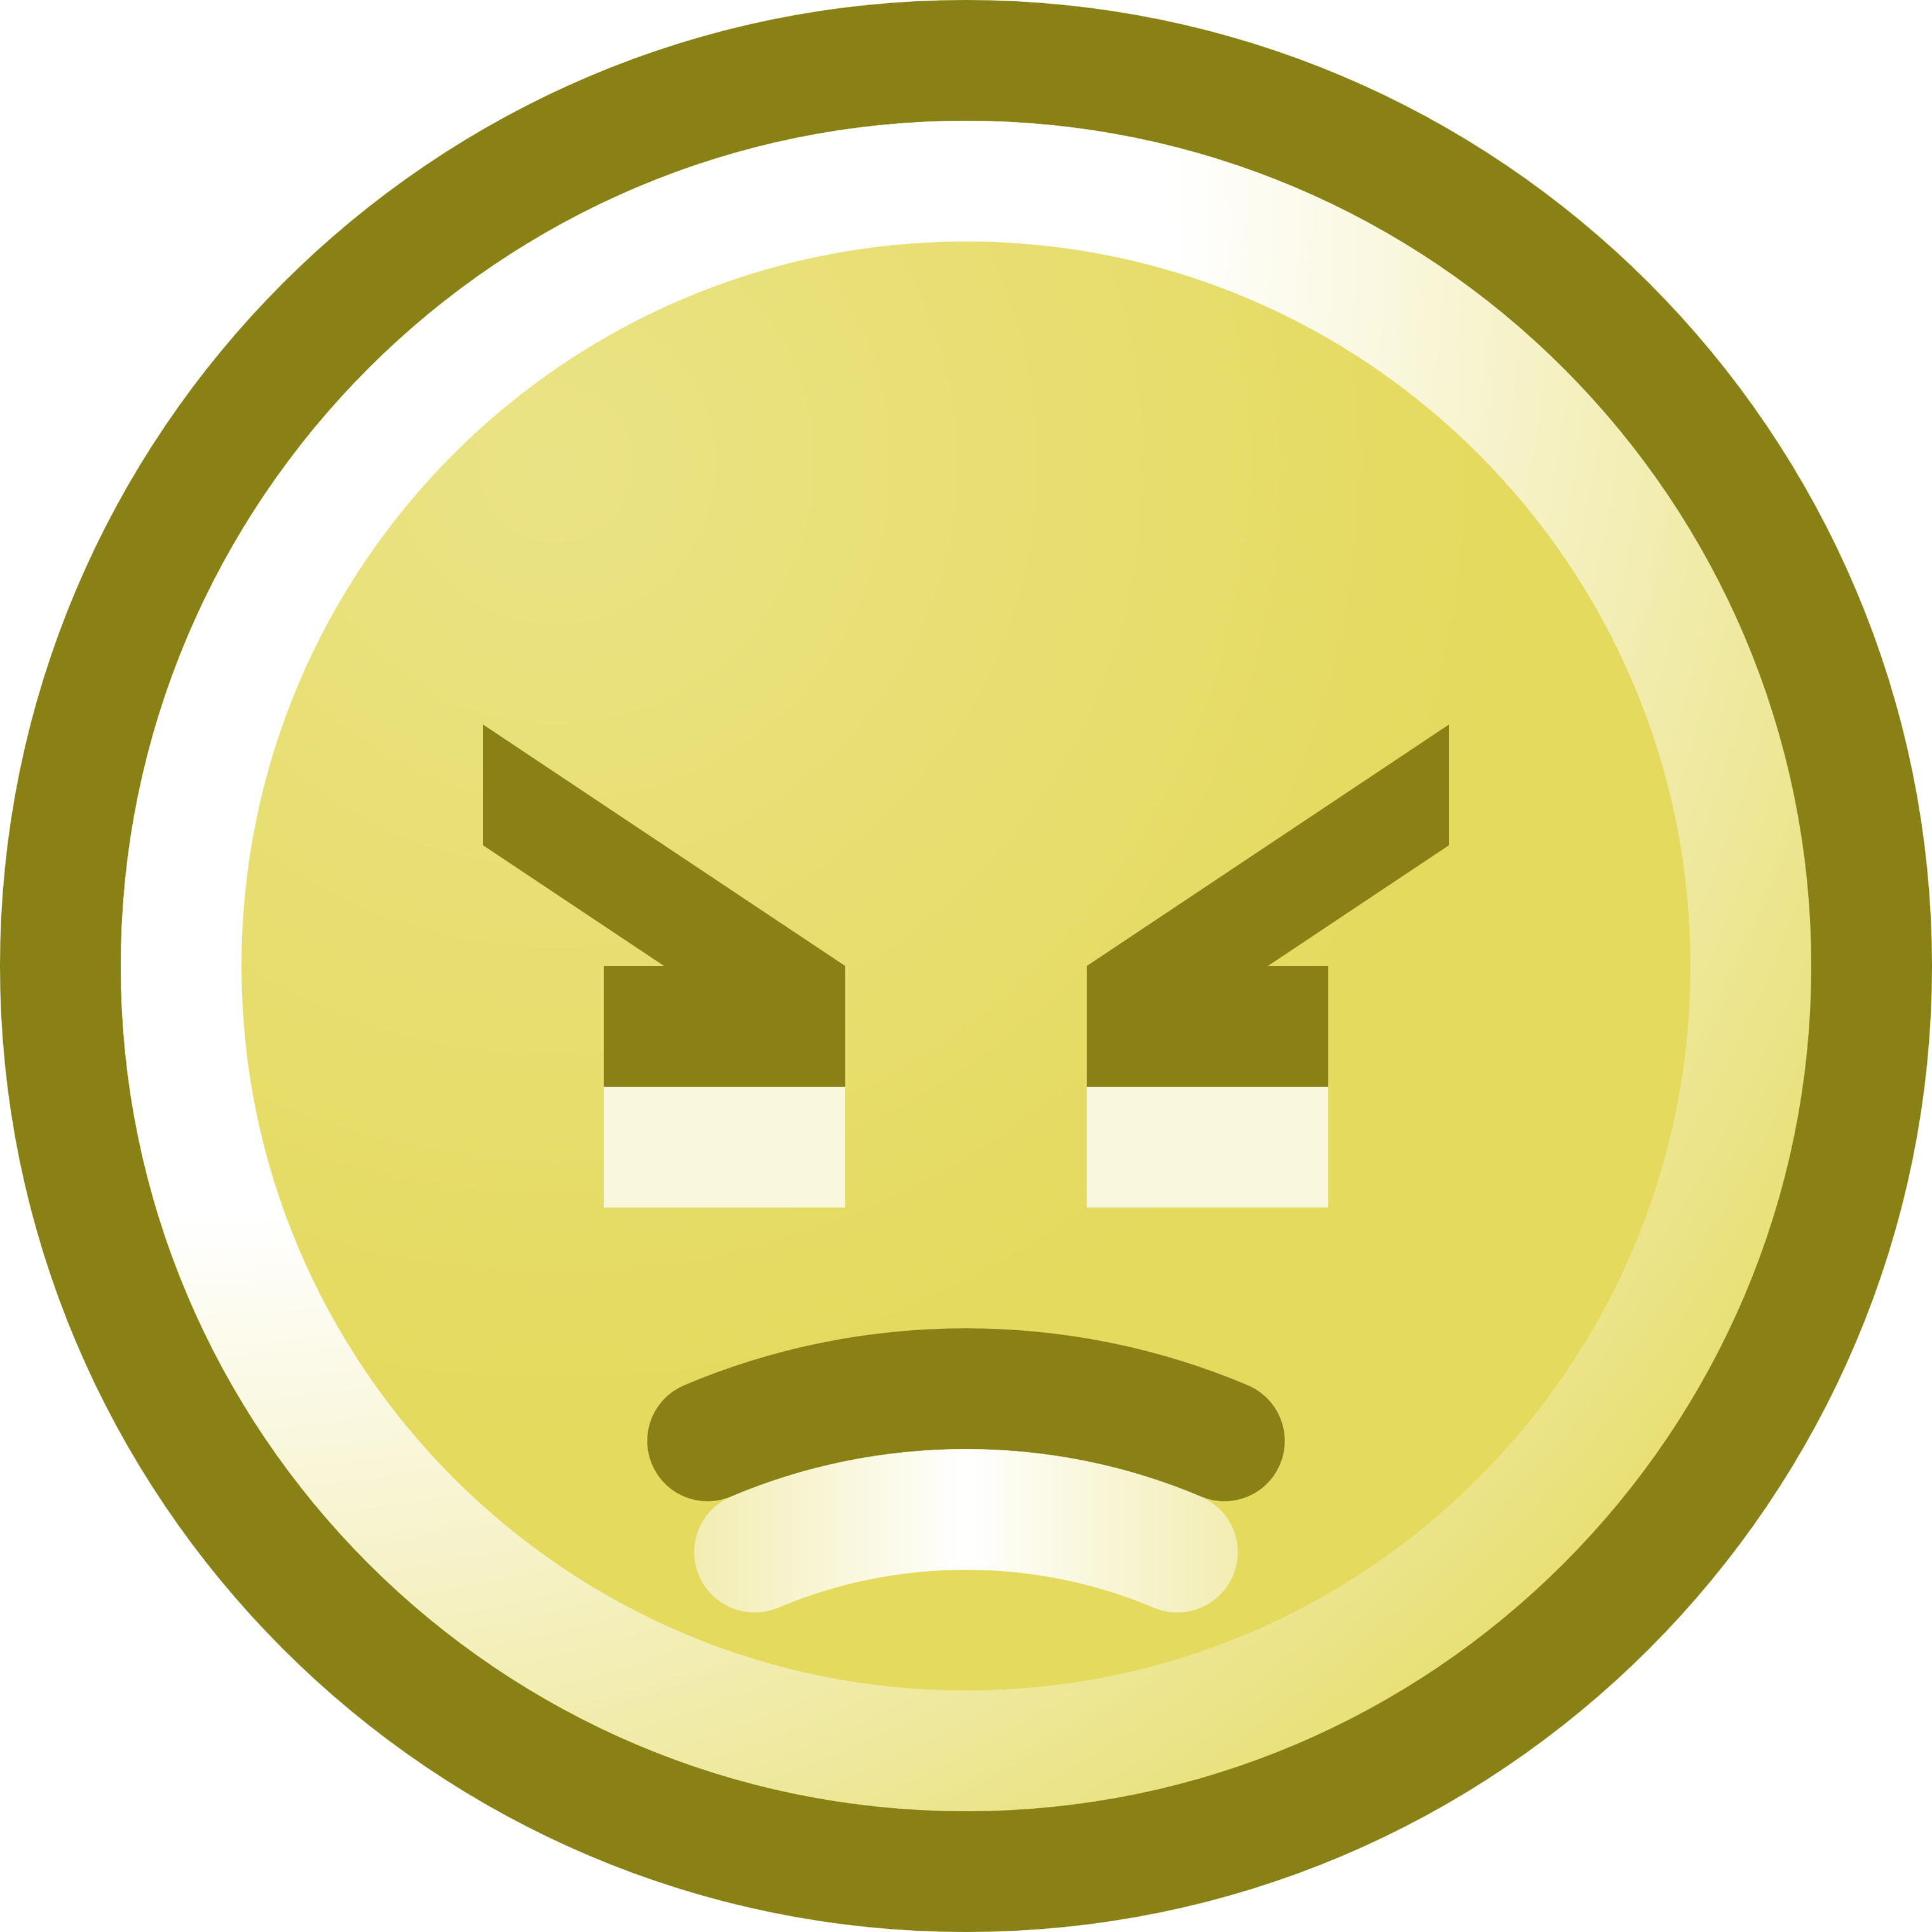 Grumpy Face Smiley Clipart - Free to use Clip Art Resource